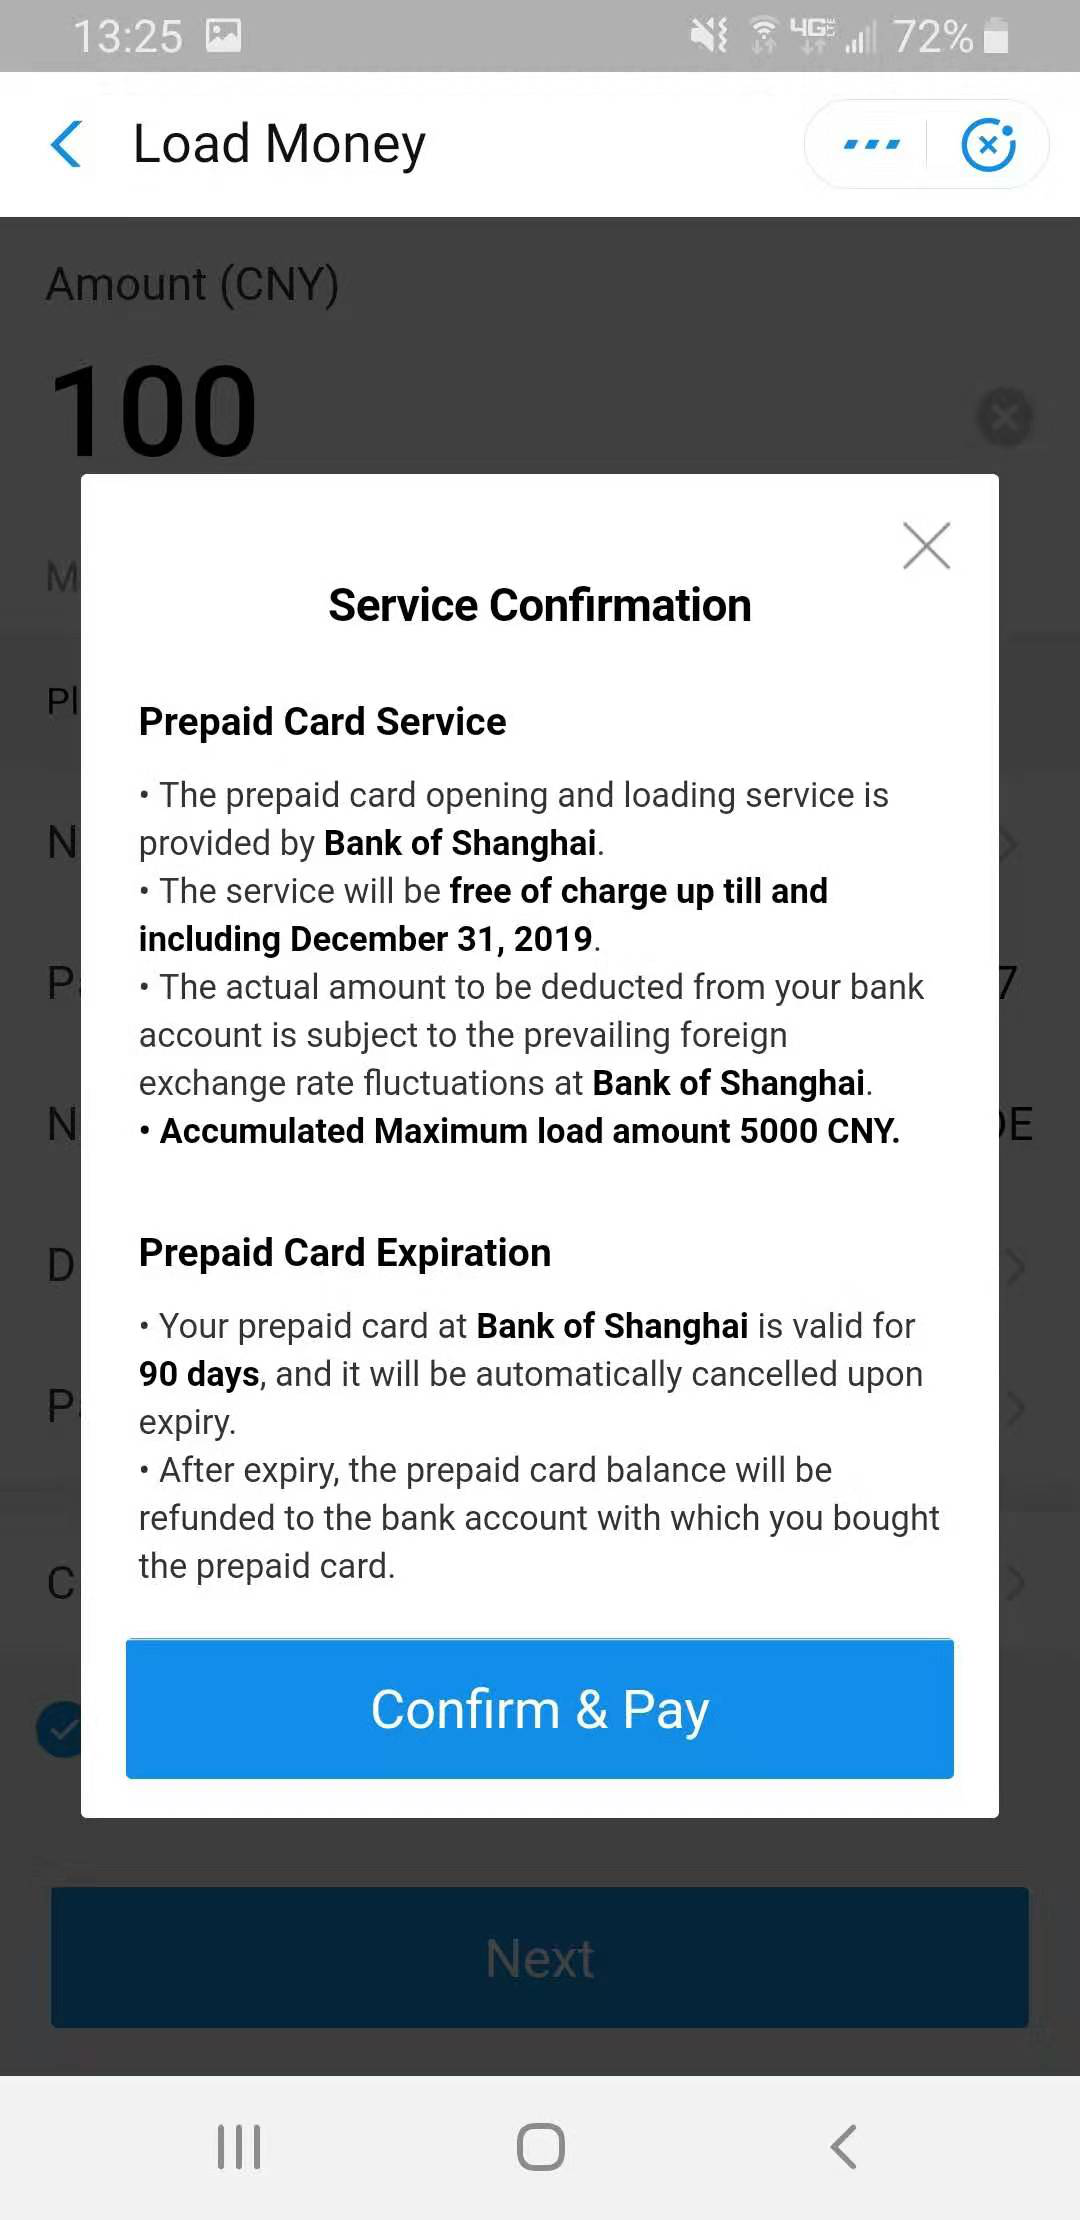 How to set up Alipay confirm and pay